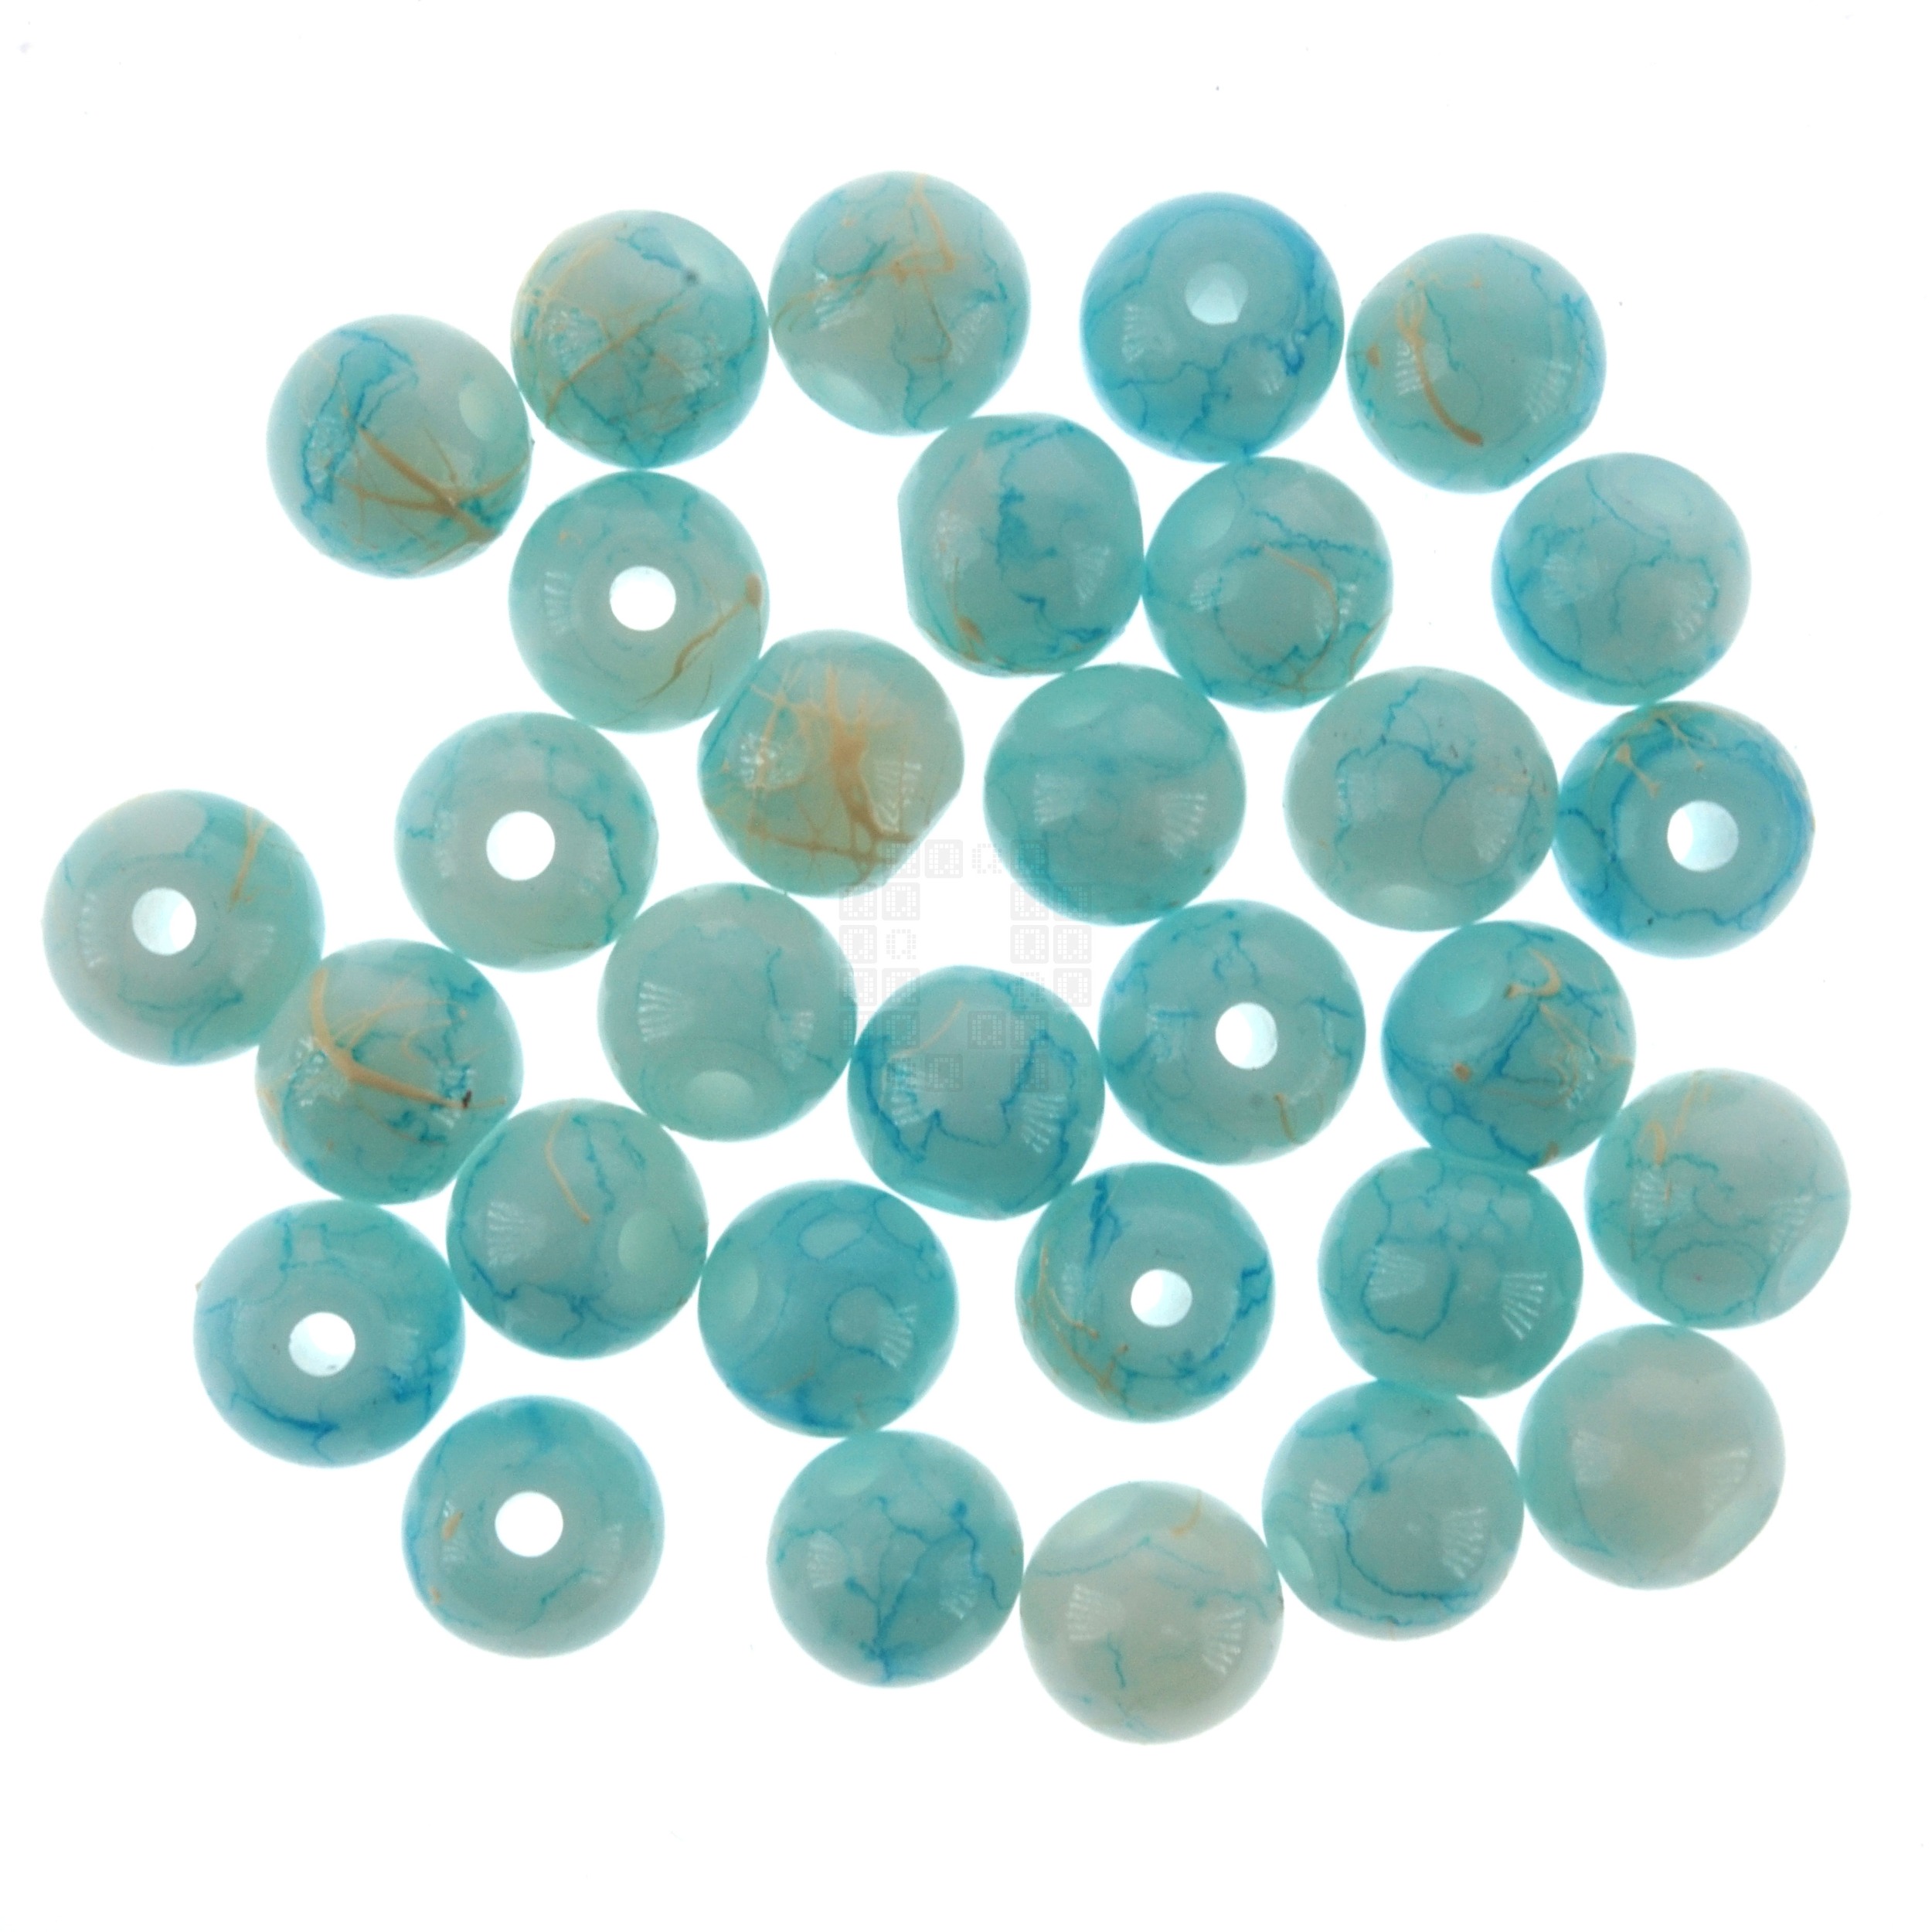 Blizzard 8mm Loose Glass Beads, 30 Pieces